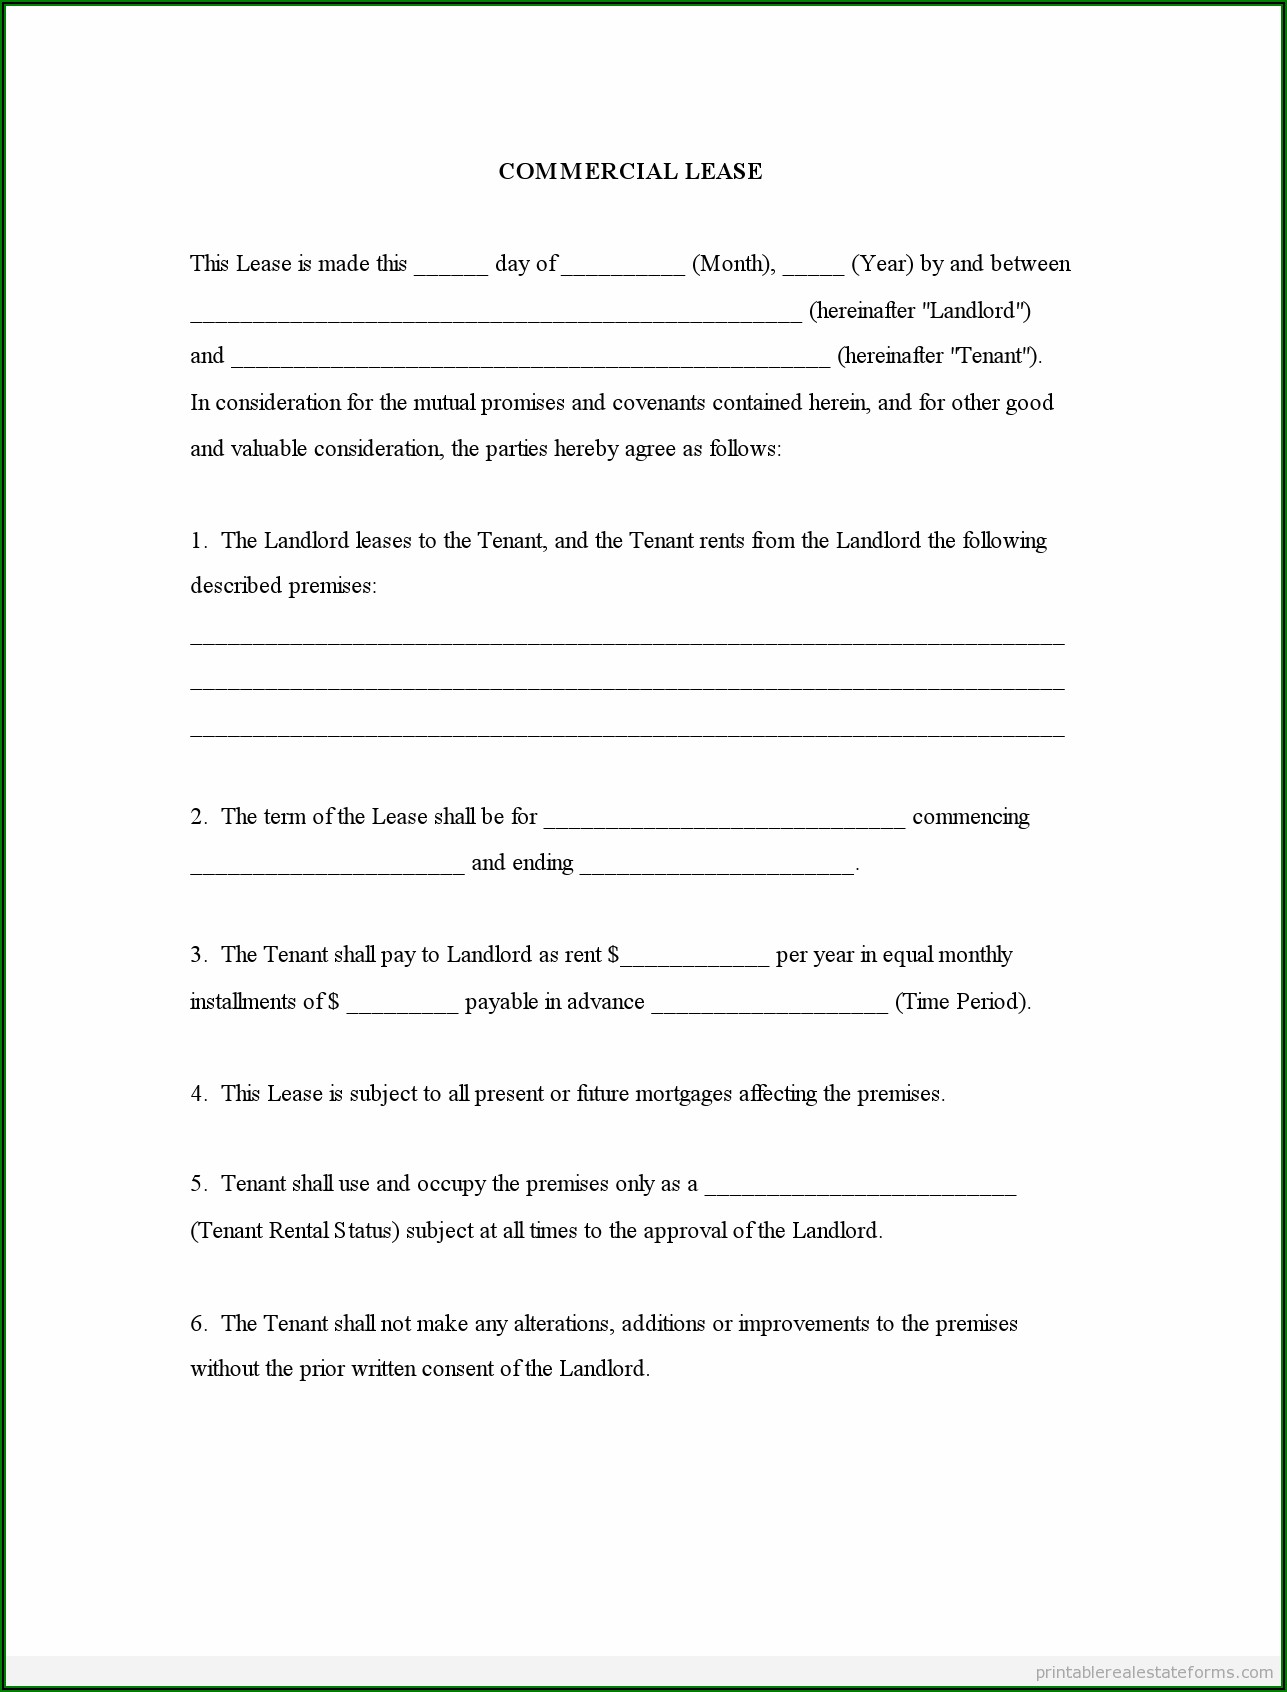 Commercial Real Estate Lease Form Free